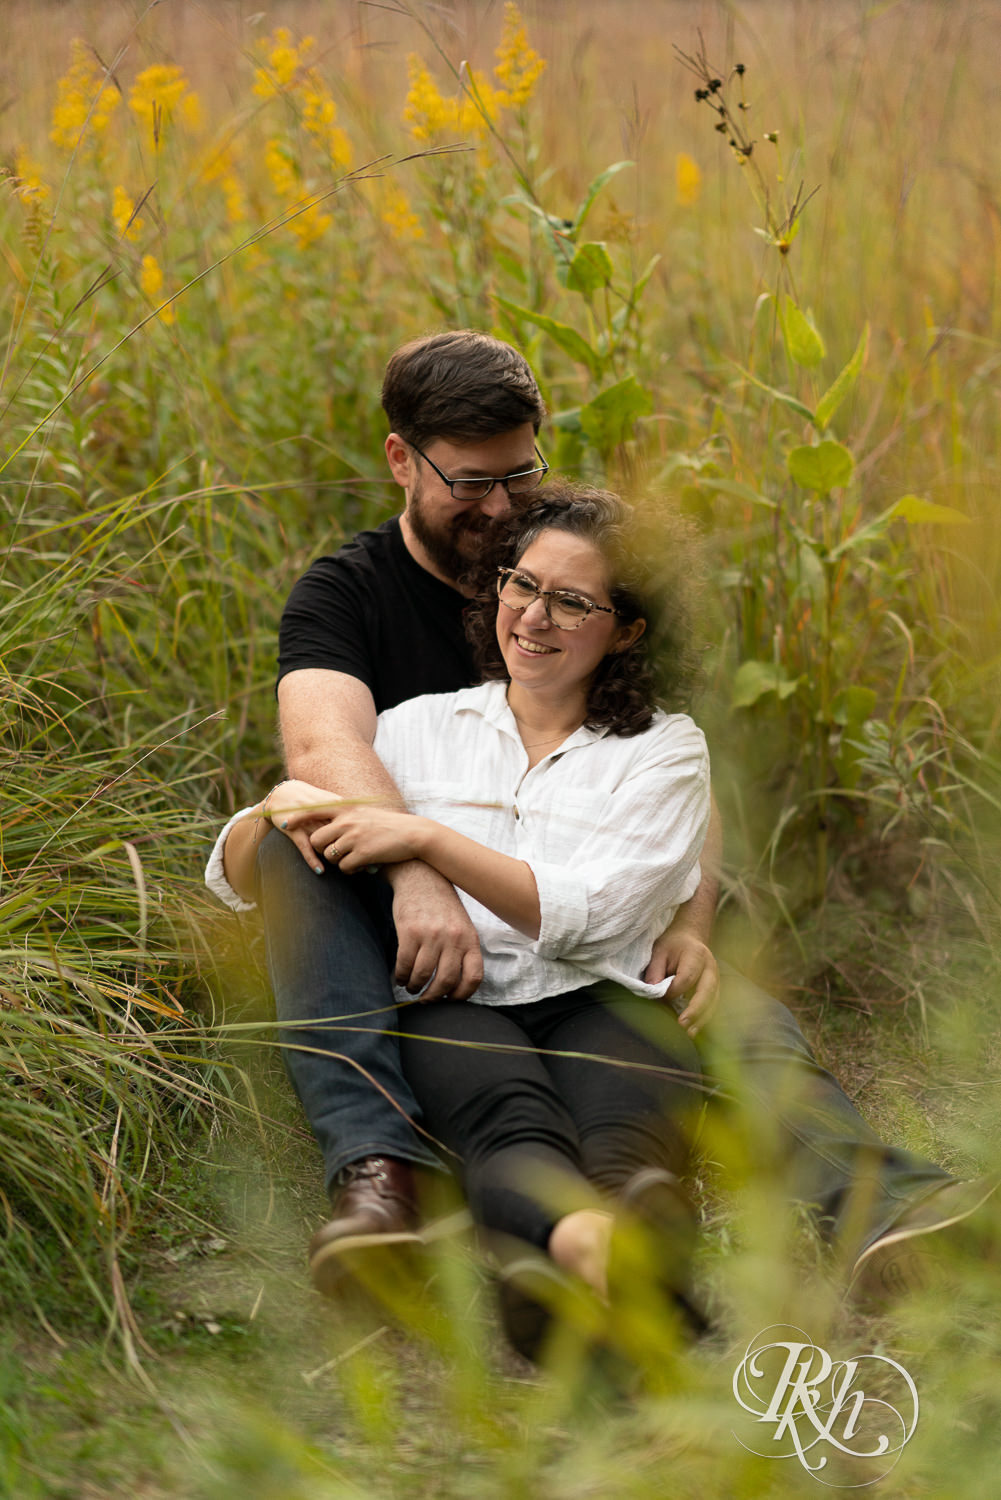 Man and woman in glasses holding each other in flower field.